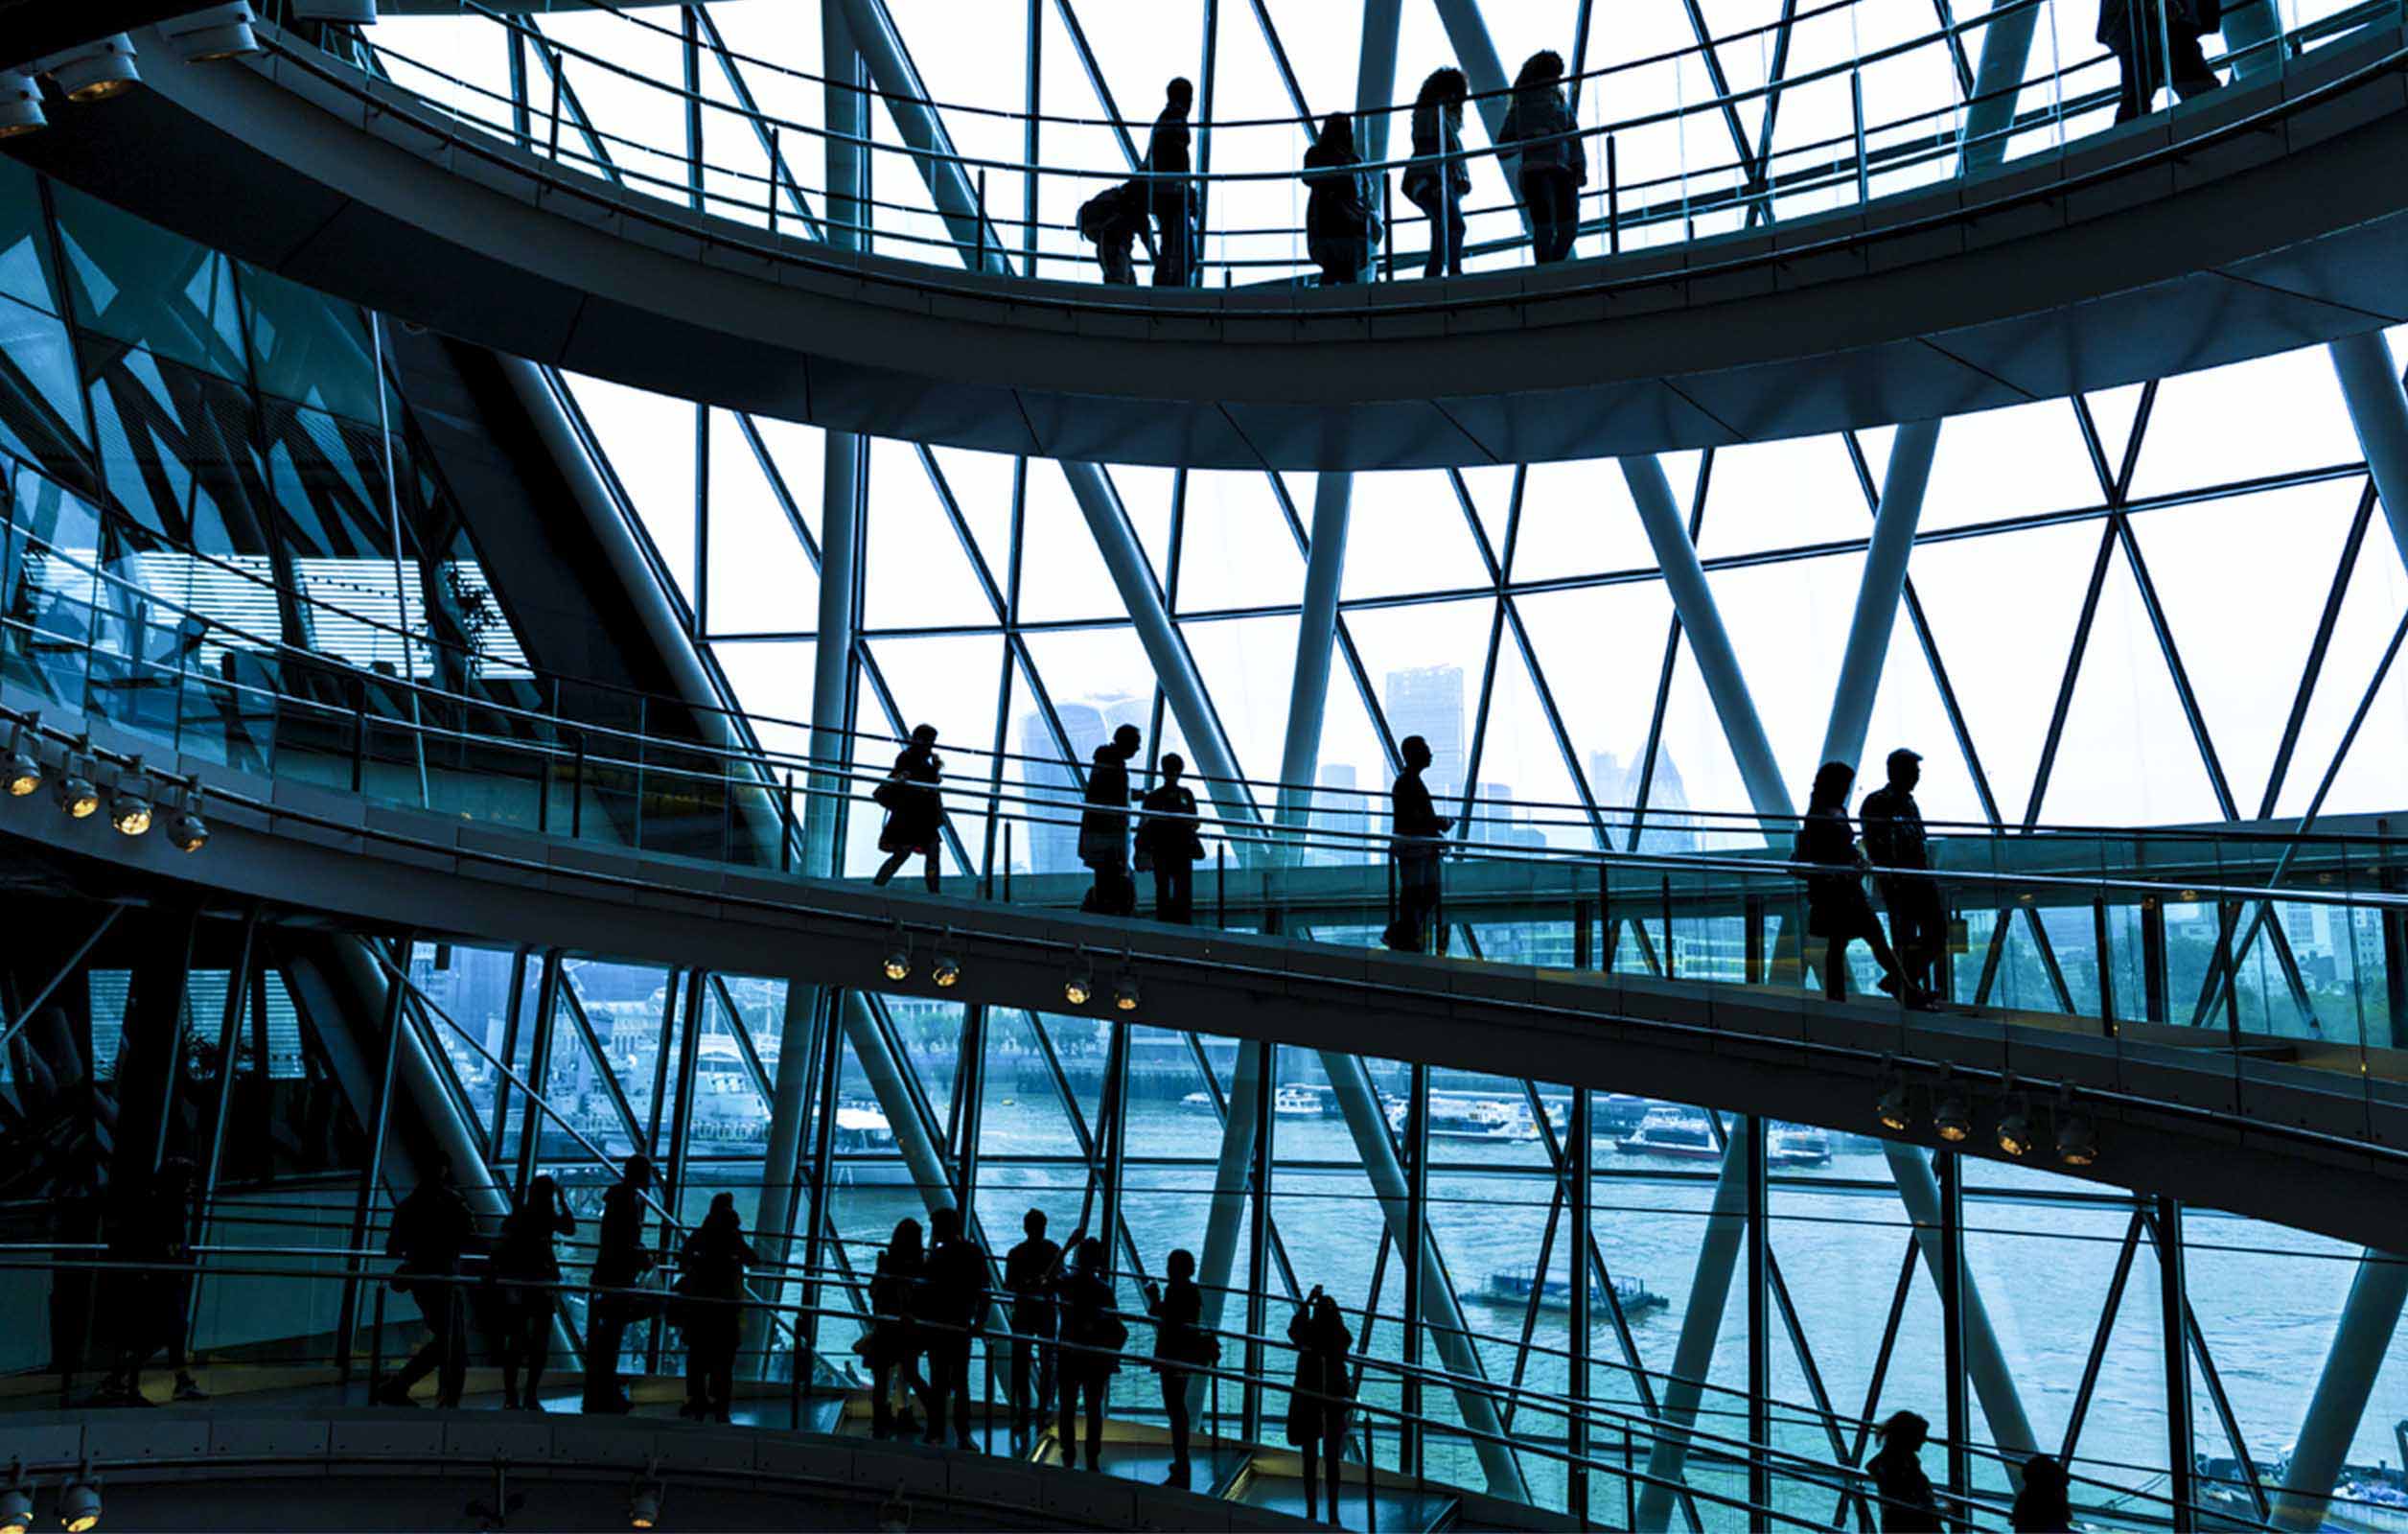 A wide shot of the interior architecture of a corporate building with people walking